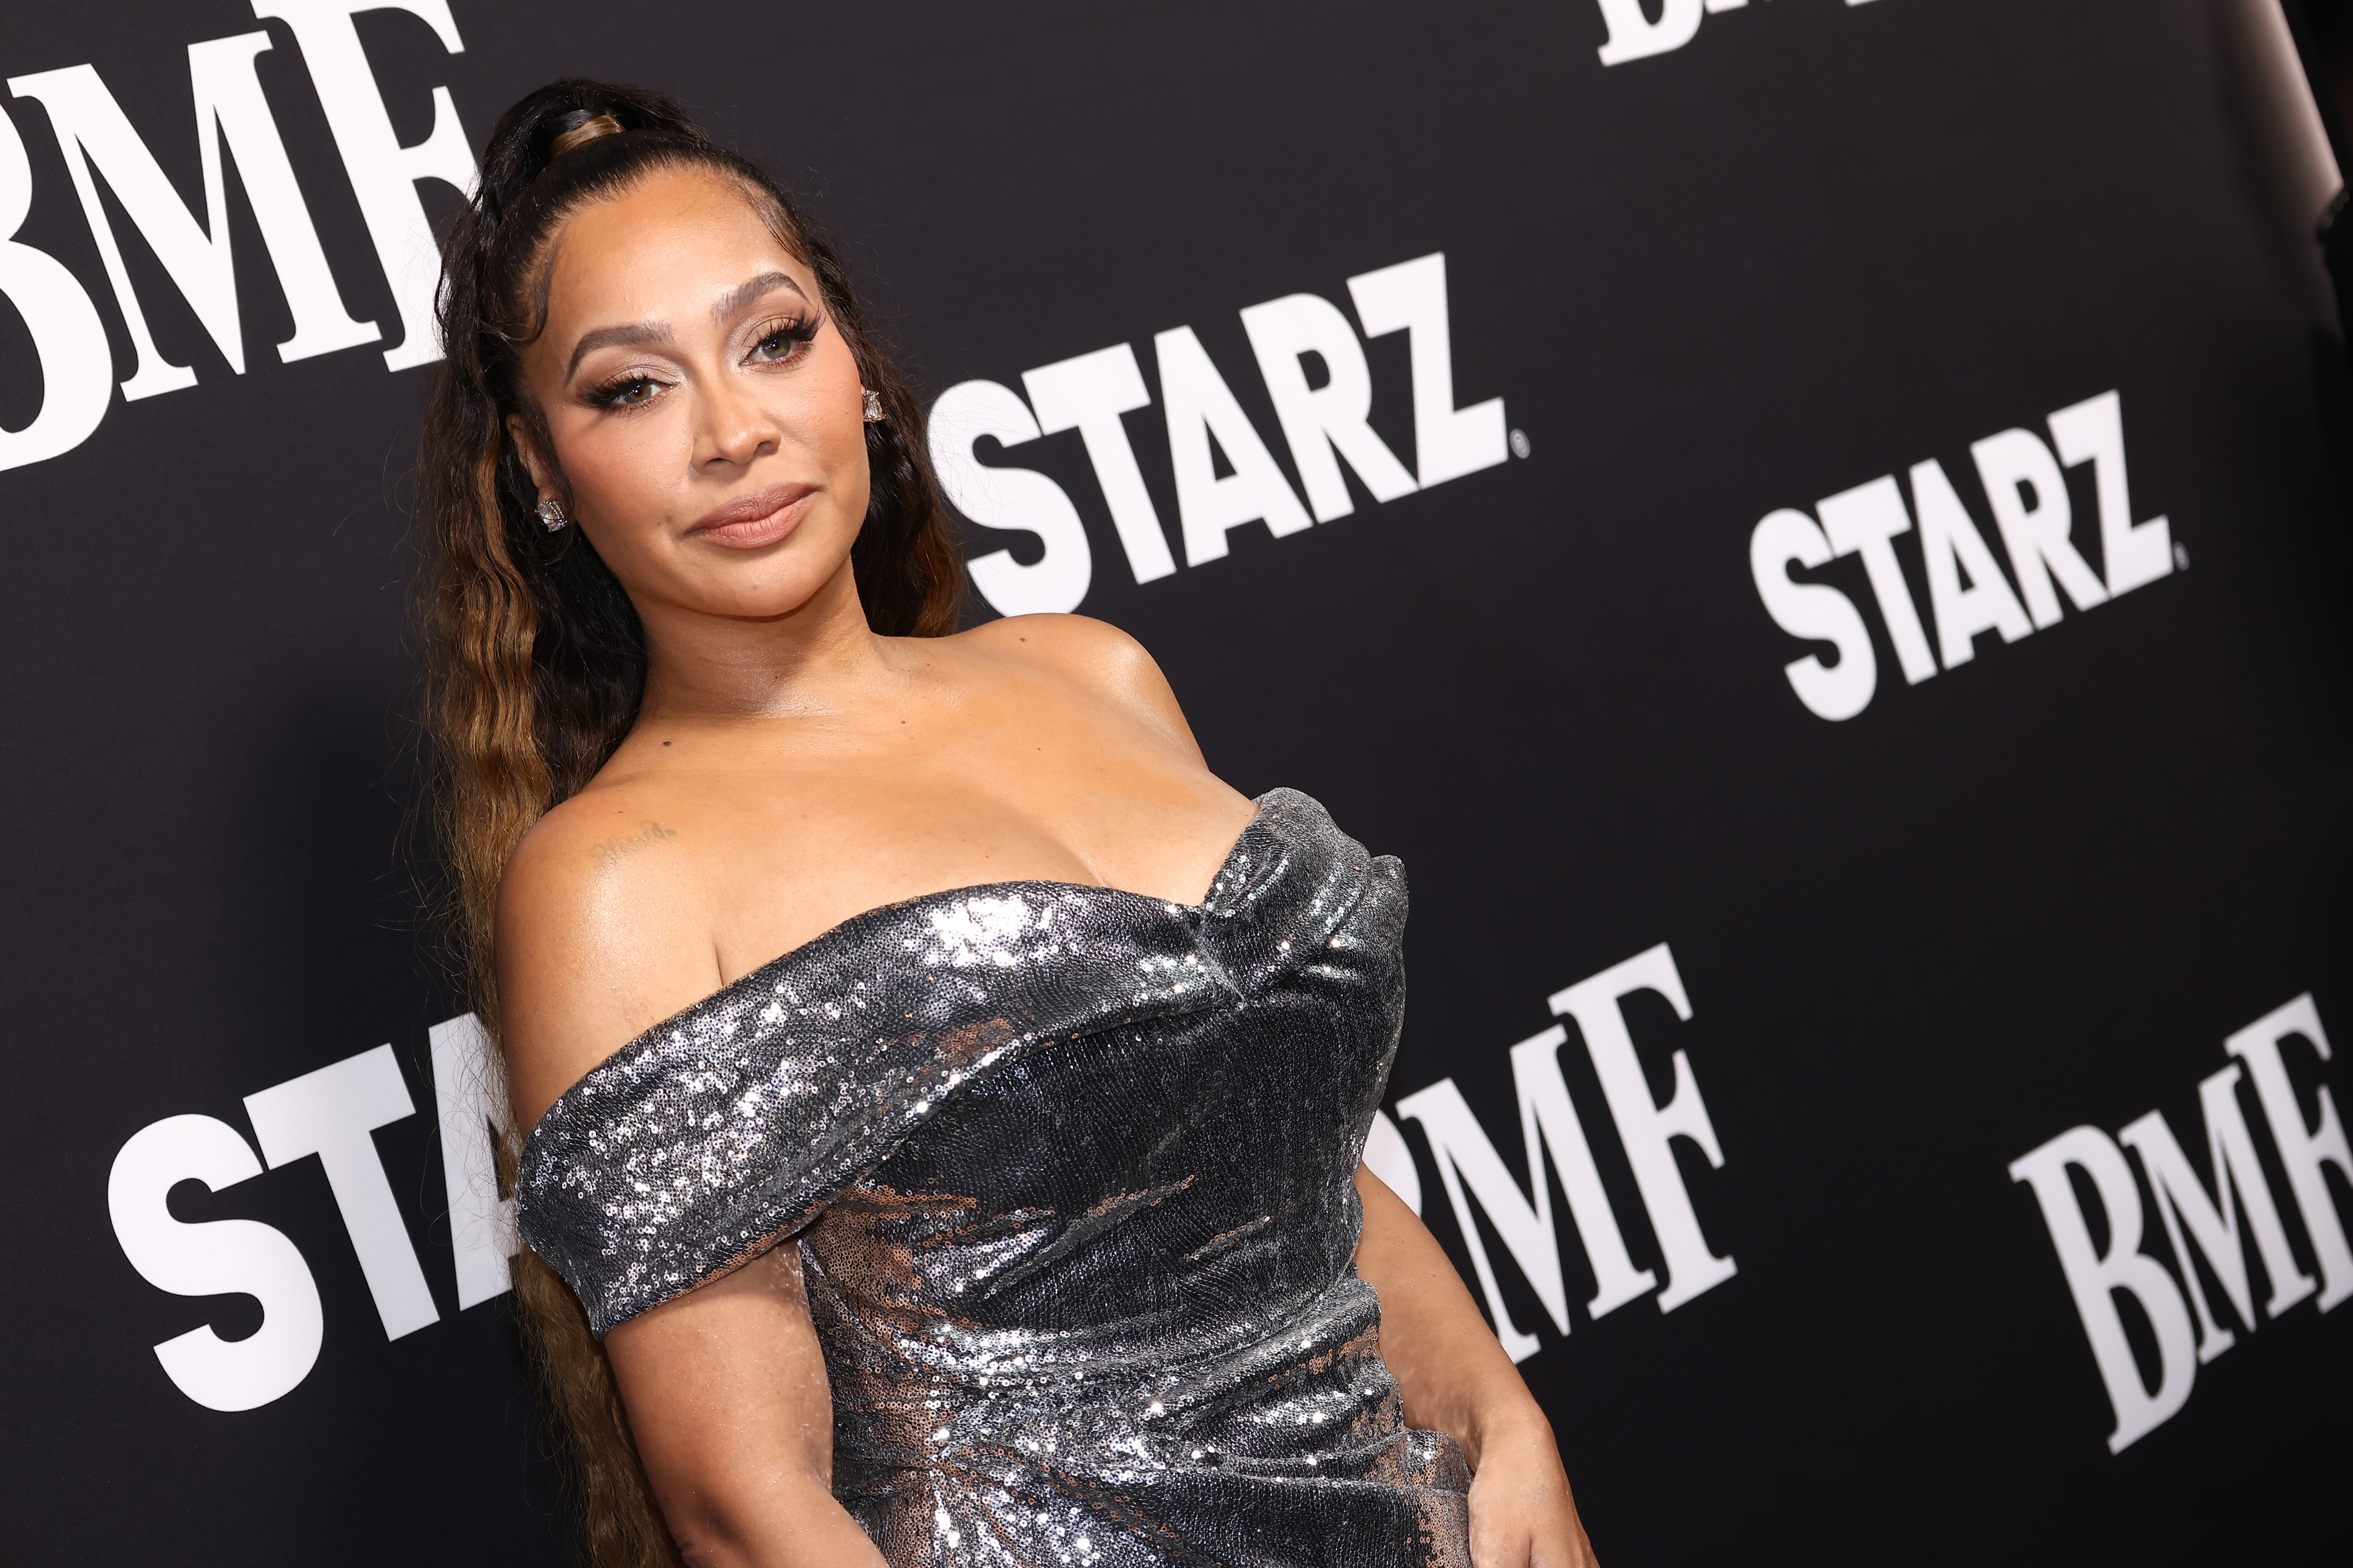 La La Anthony Advises Artists To Take Any Opportunity, Even If It Won’t Pay